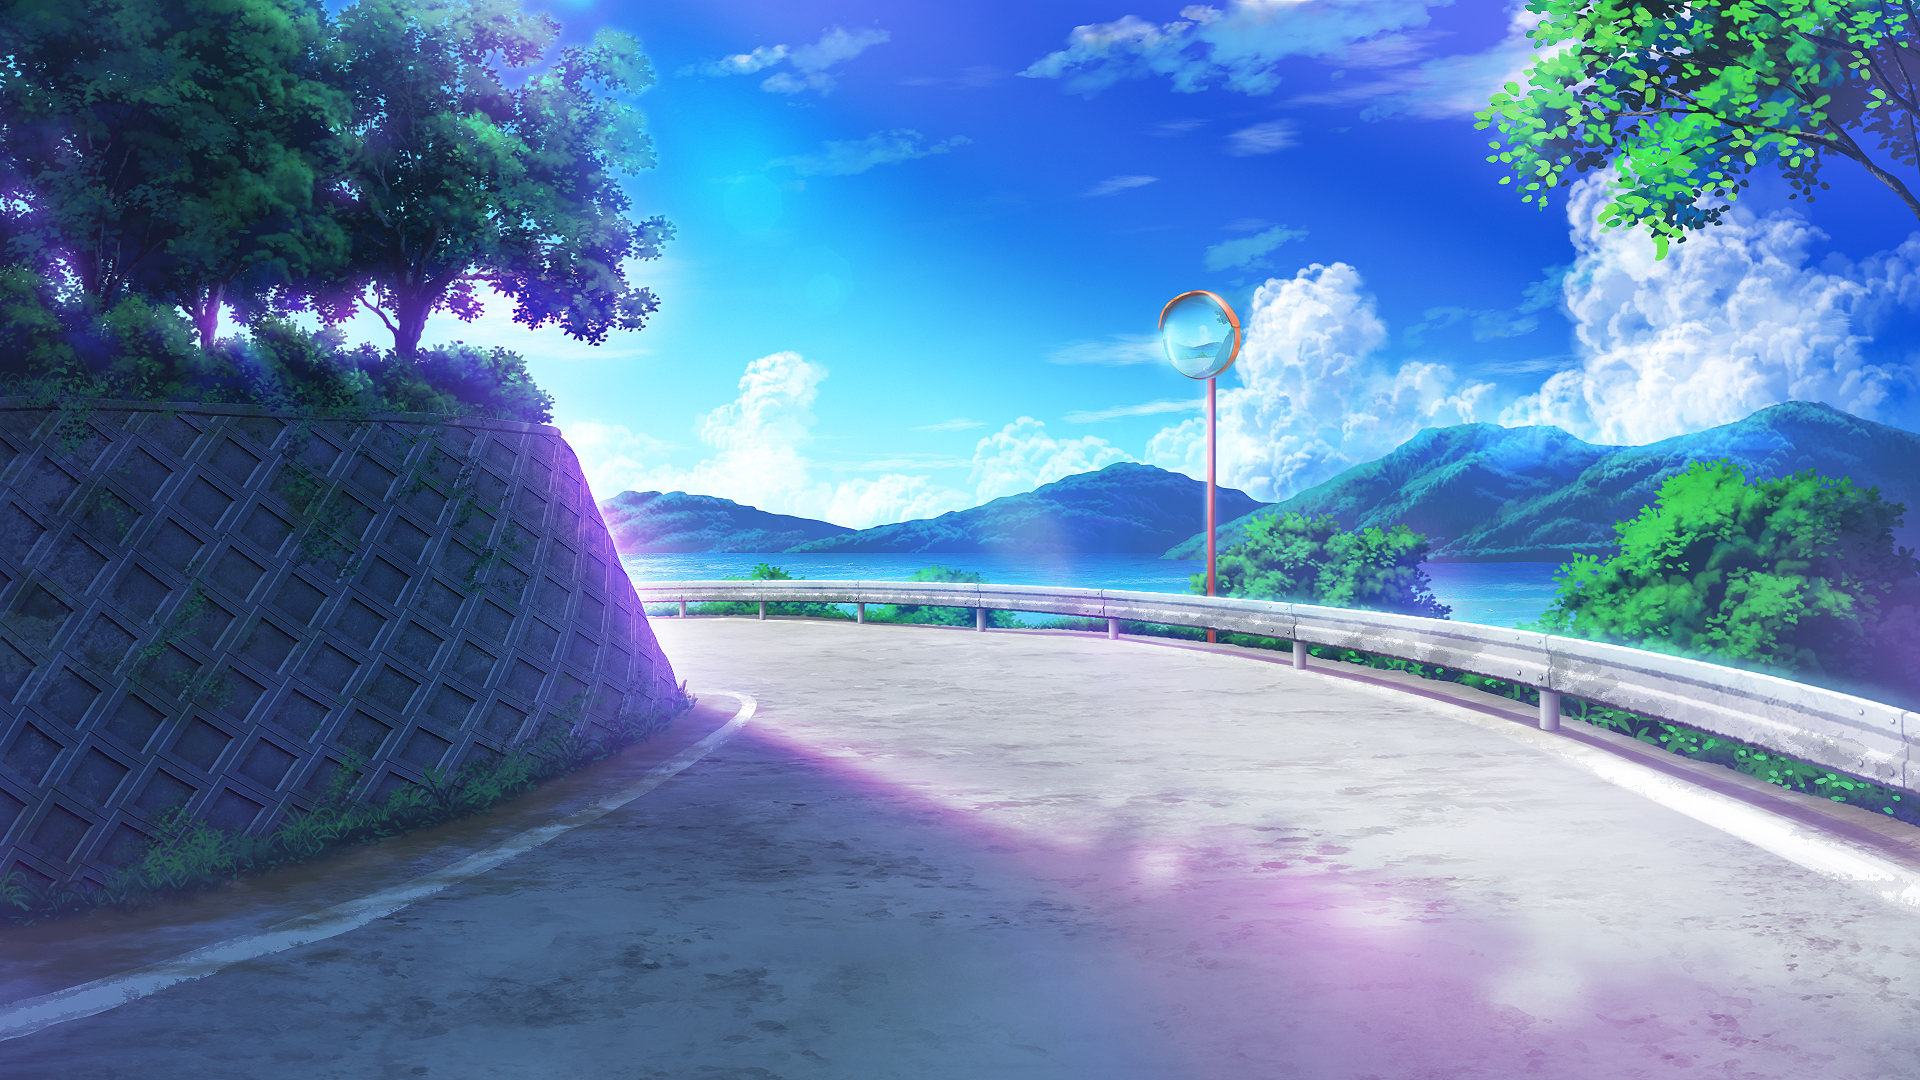 Beautiful Anime Scenery with Mountains